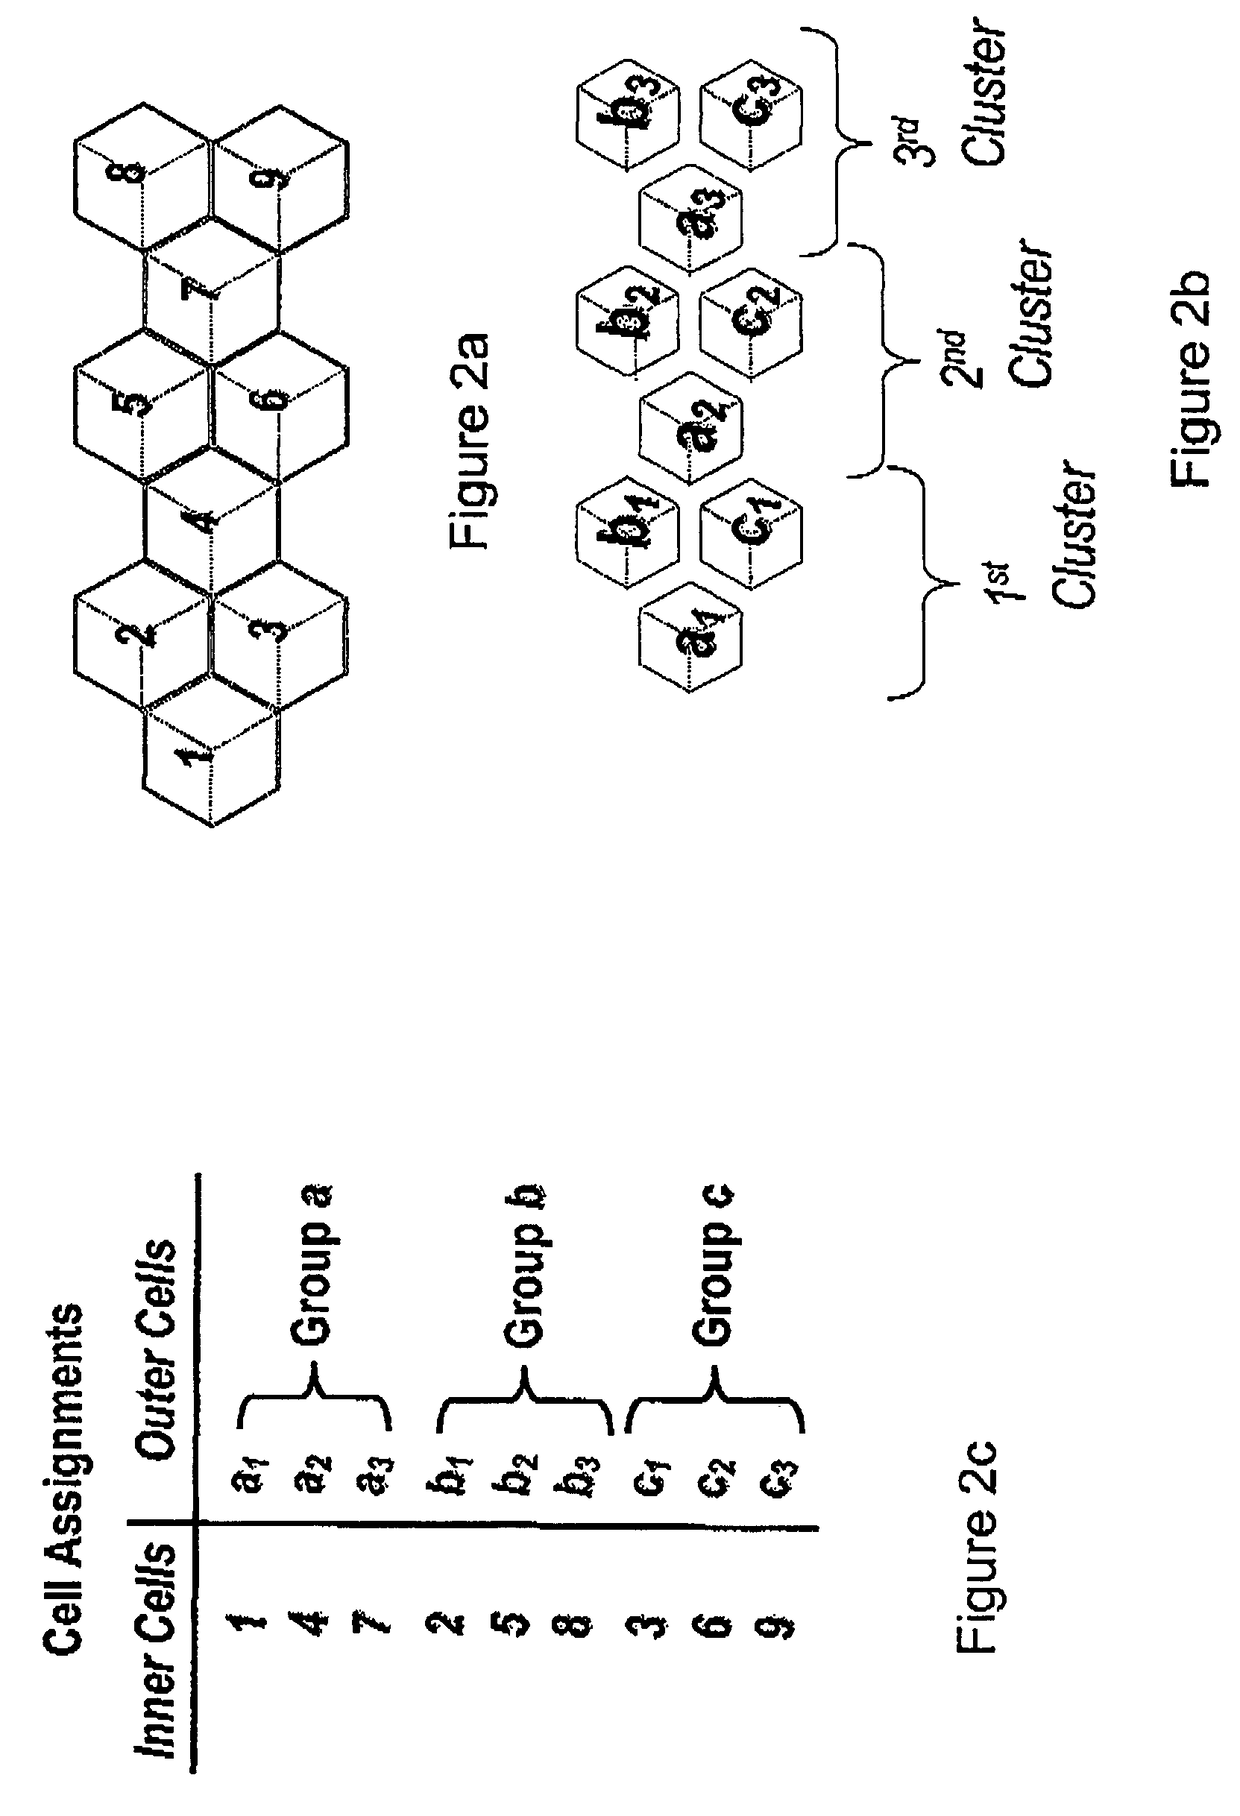 Systems and methods for operating wireless networks